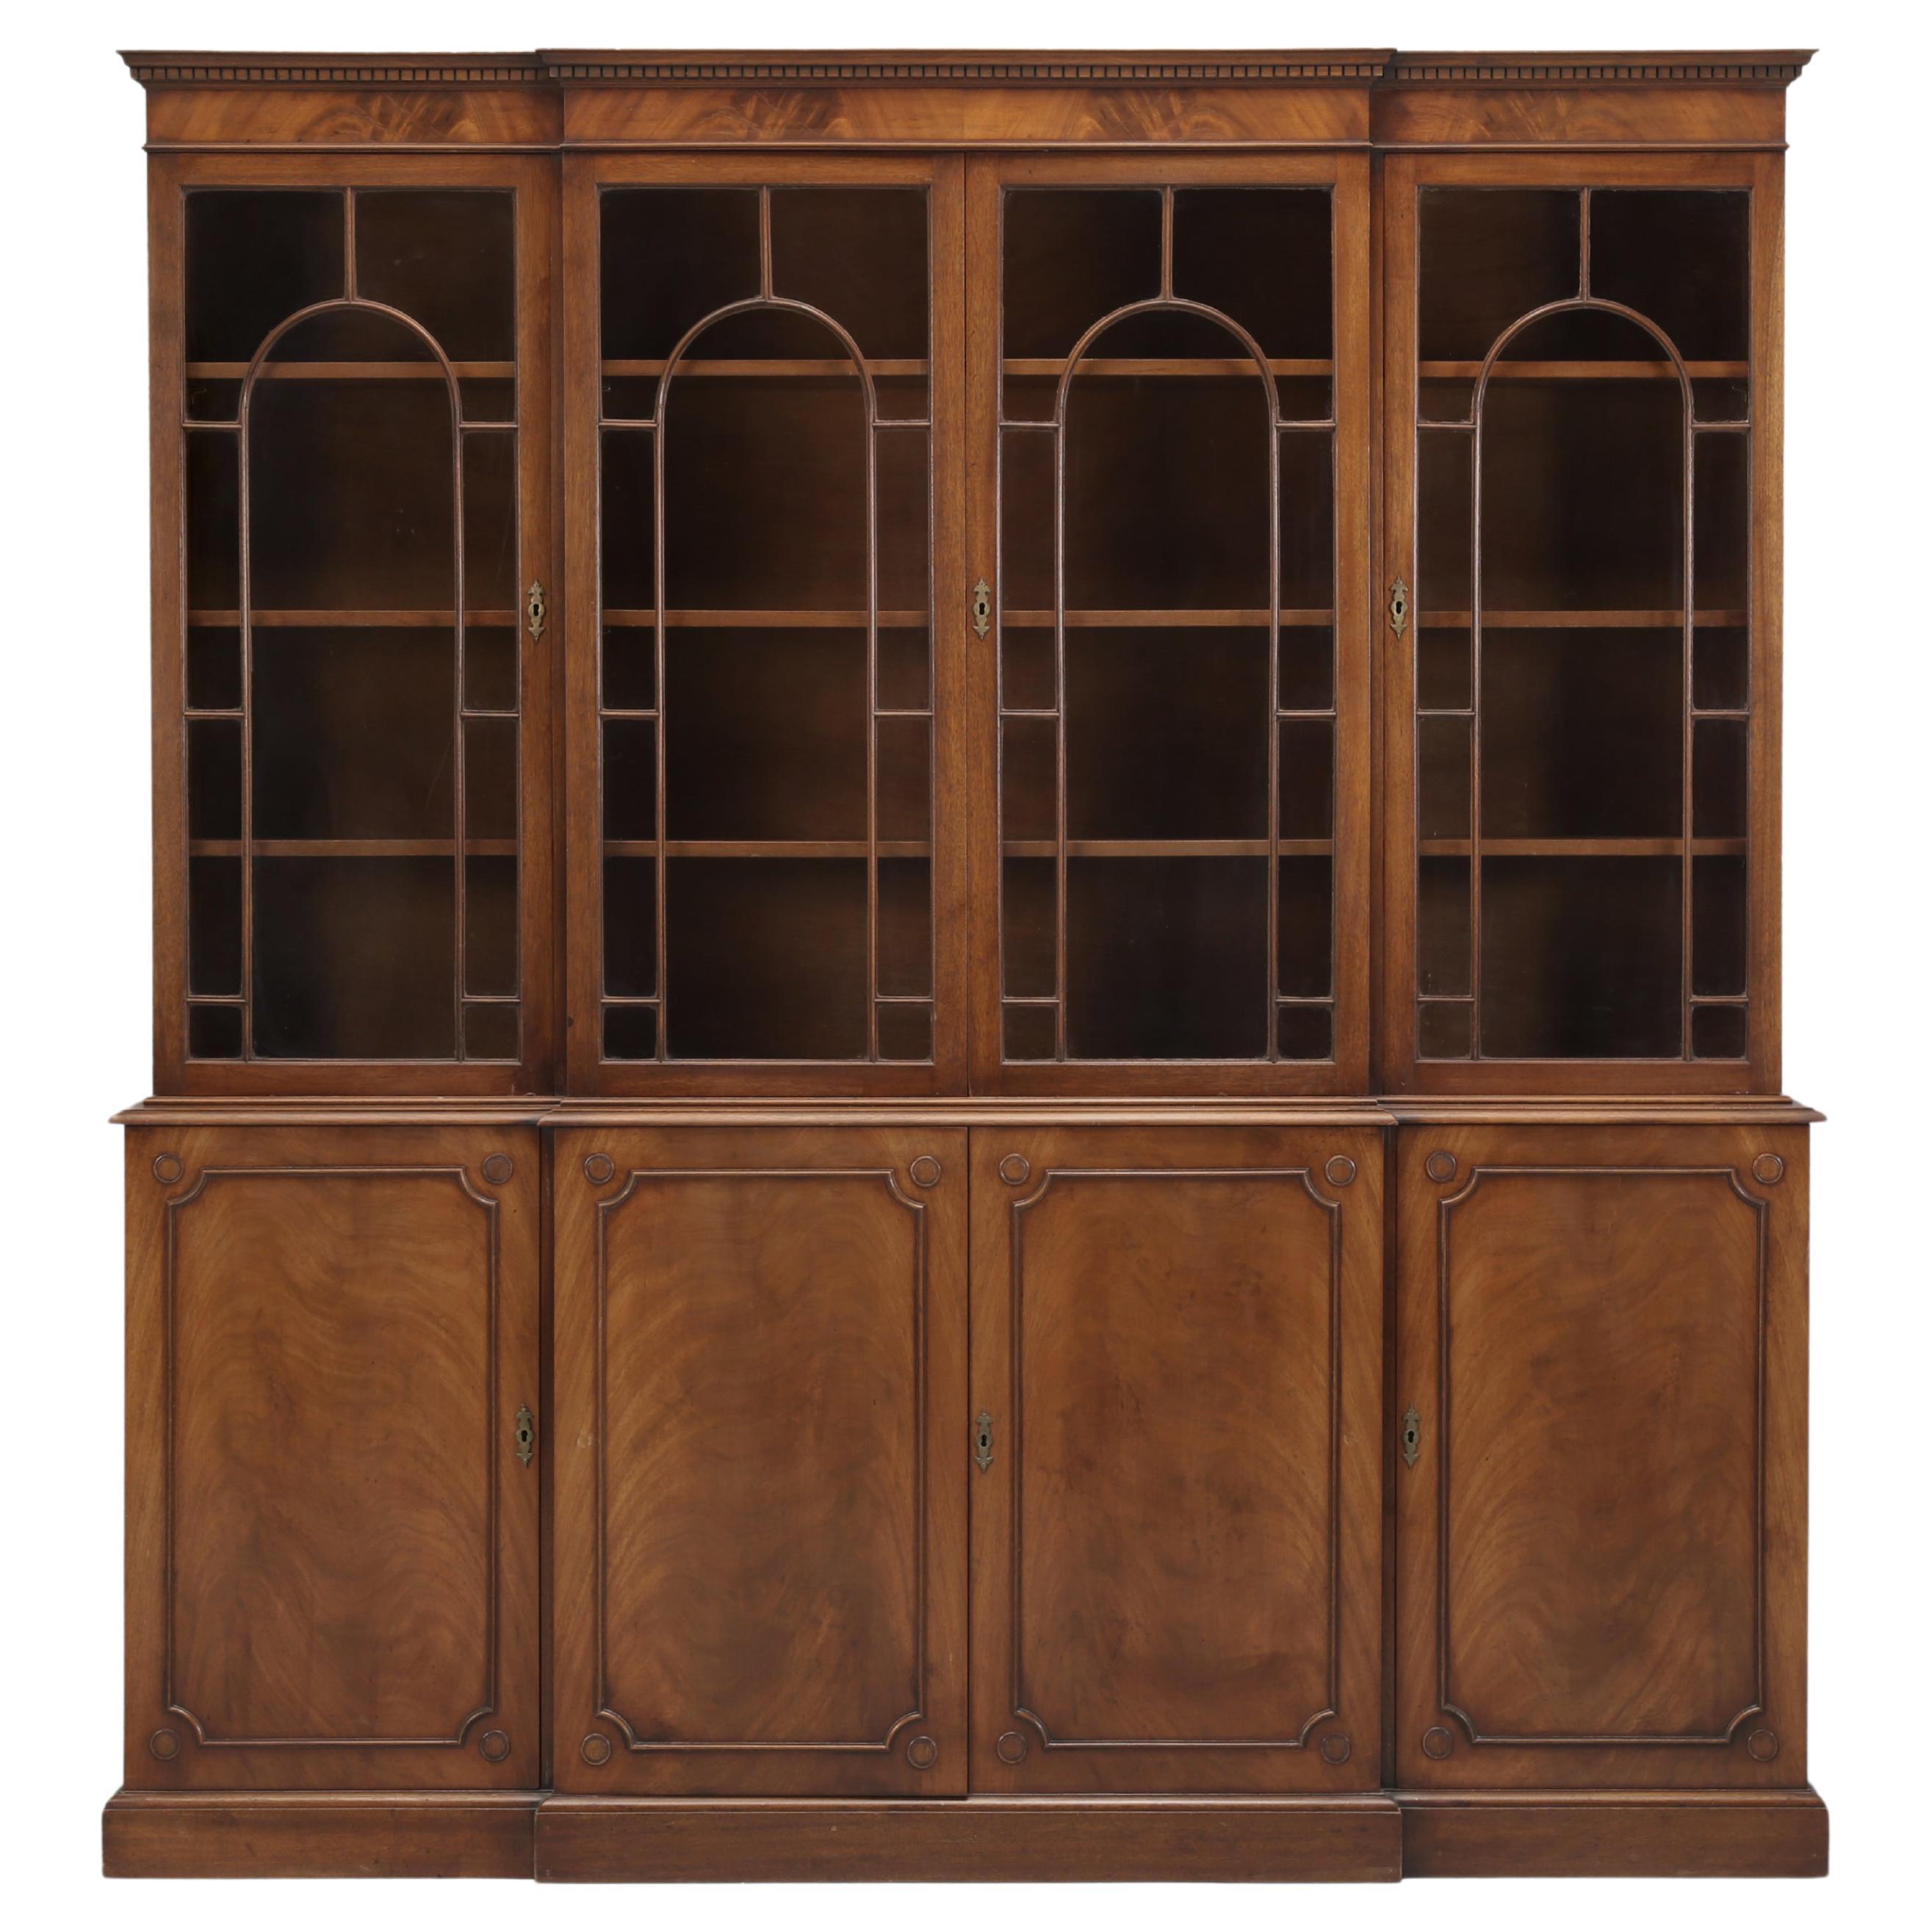 English Georgian Mahogany Breakfront Bookcase or China Cabinet in Orig Condition